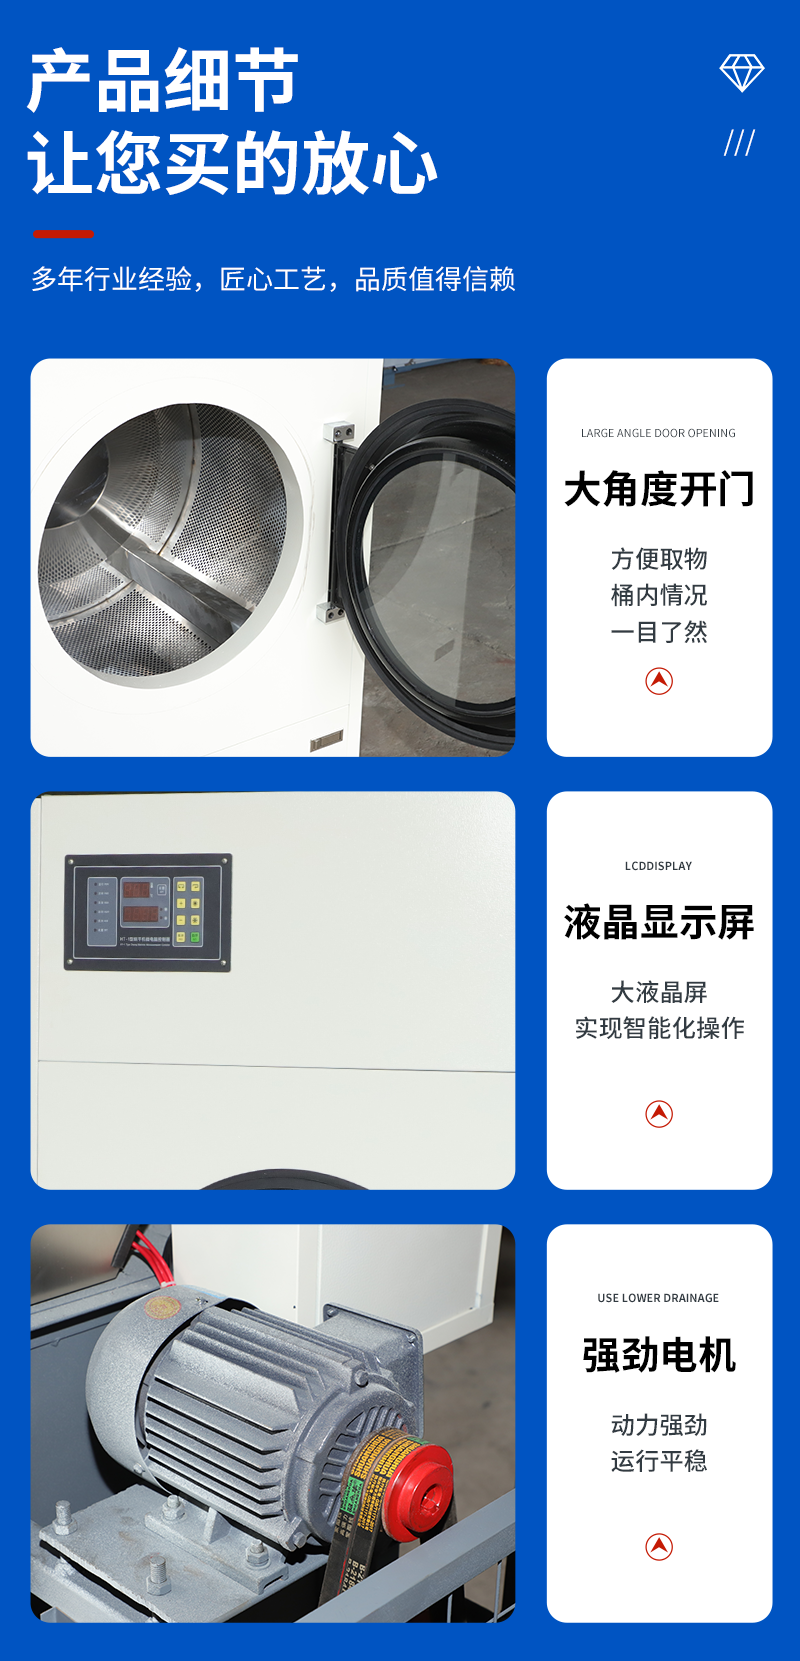 15 kg electric heating disinfection towel dryer, hair salon drying equipment, stainless steel oven